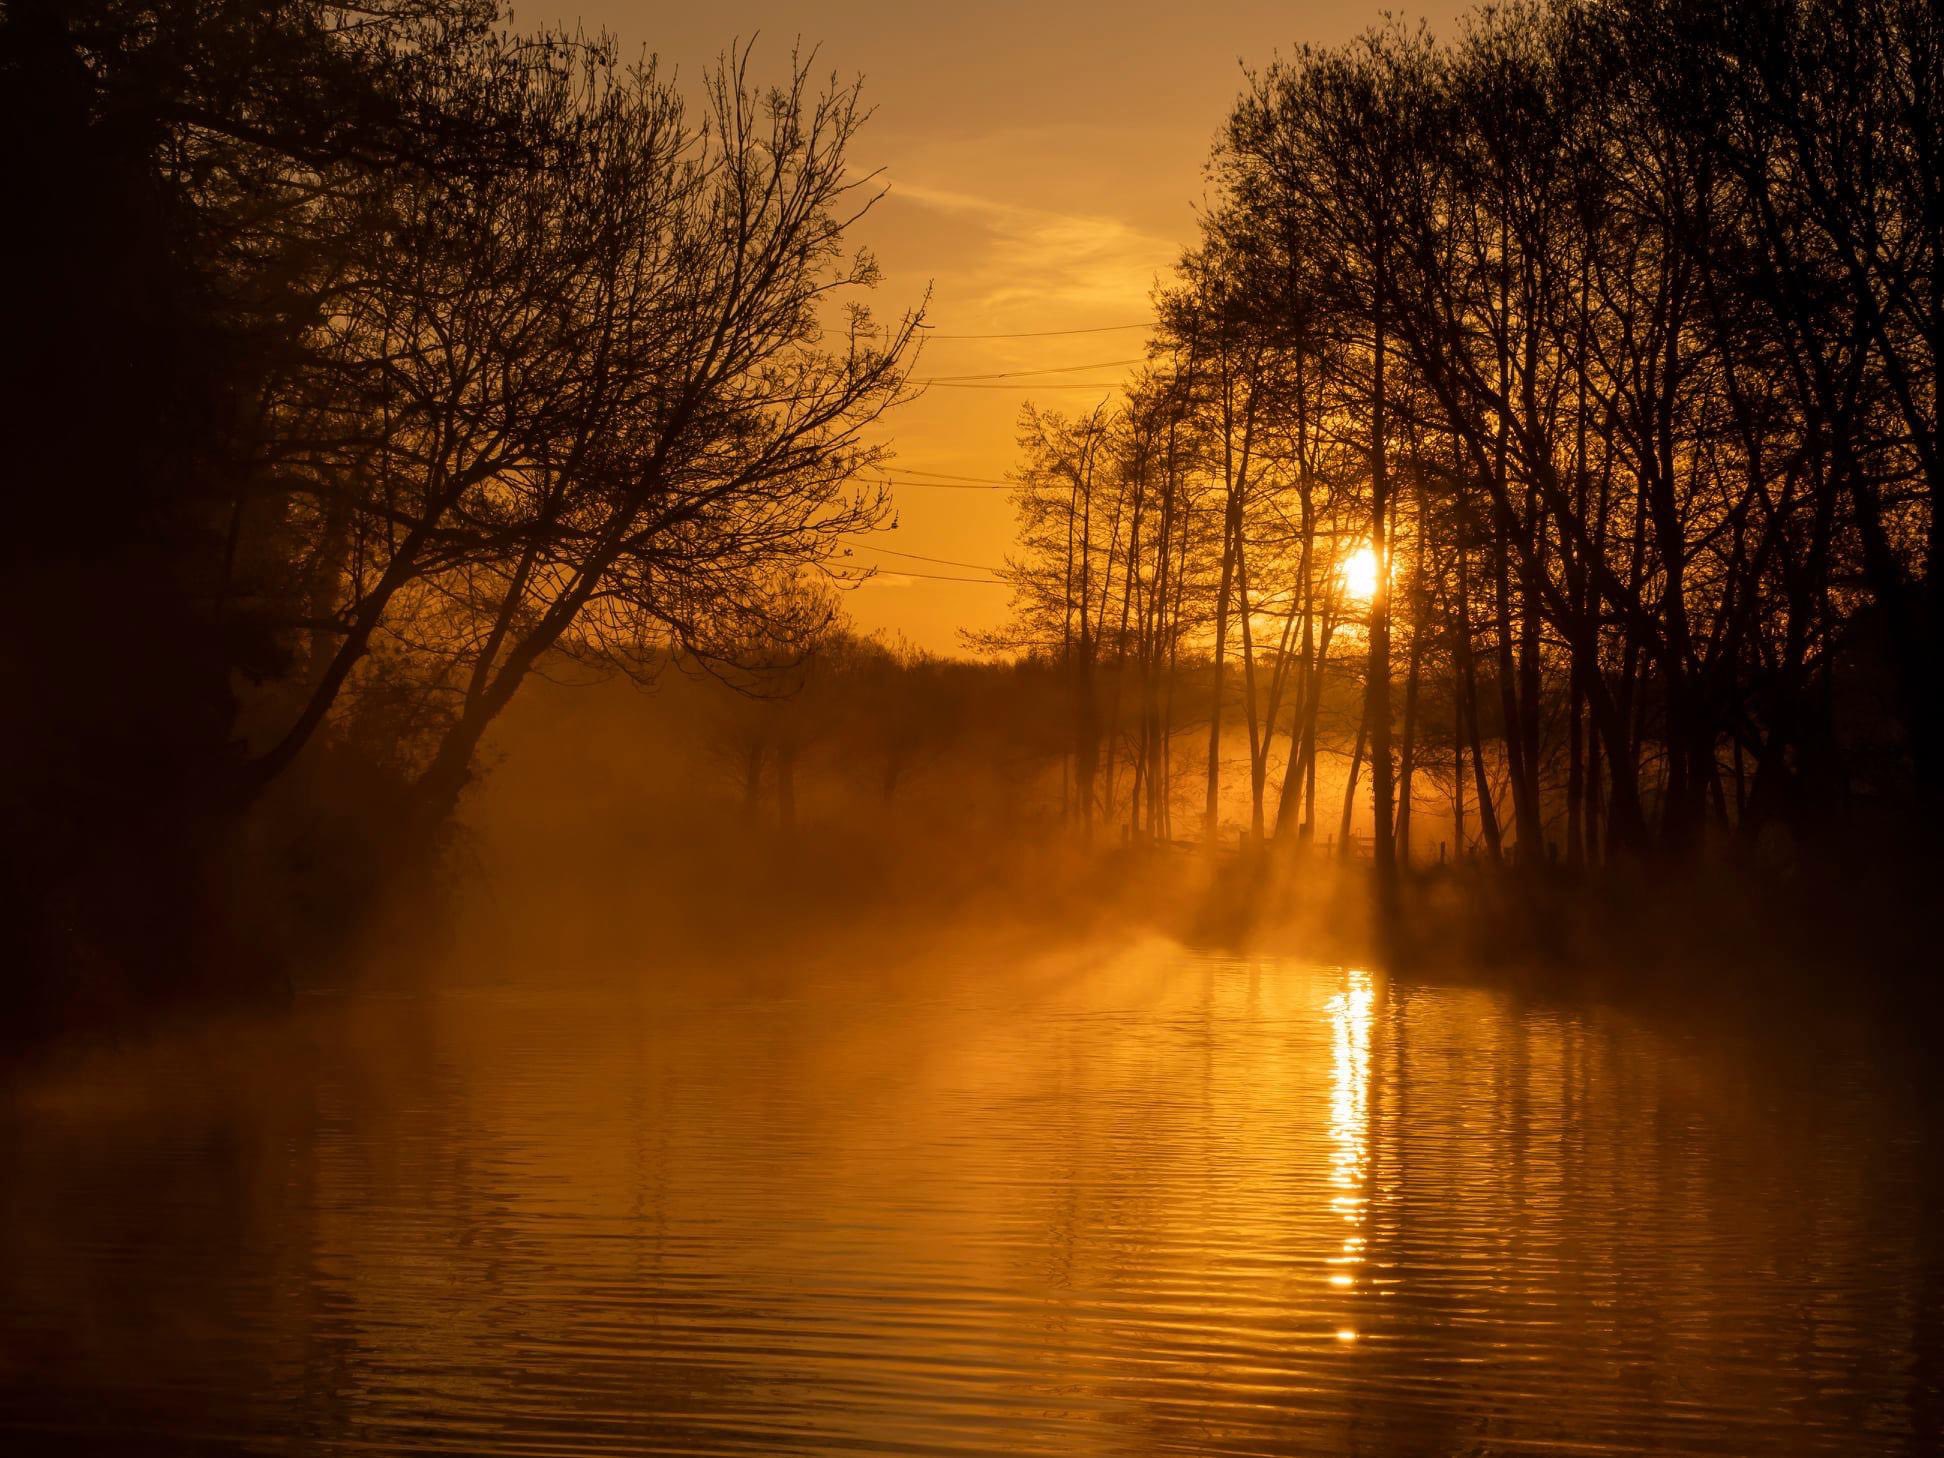 3rd Place Misty sunrise, River Wey in Guildford by MarkFullerPhotography @MarkFullerPhot1